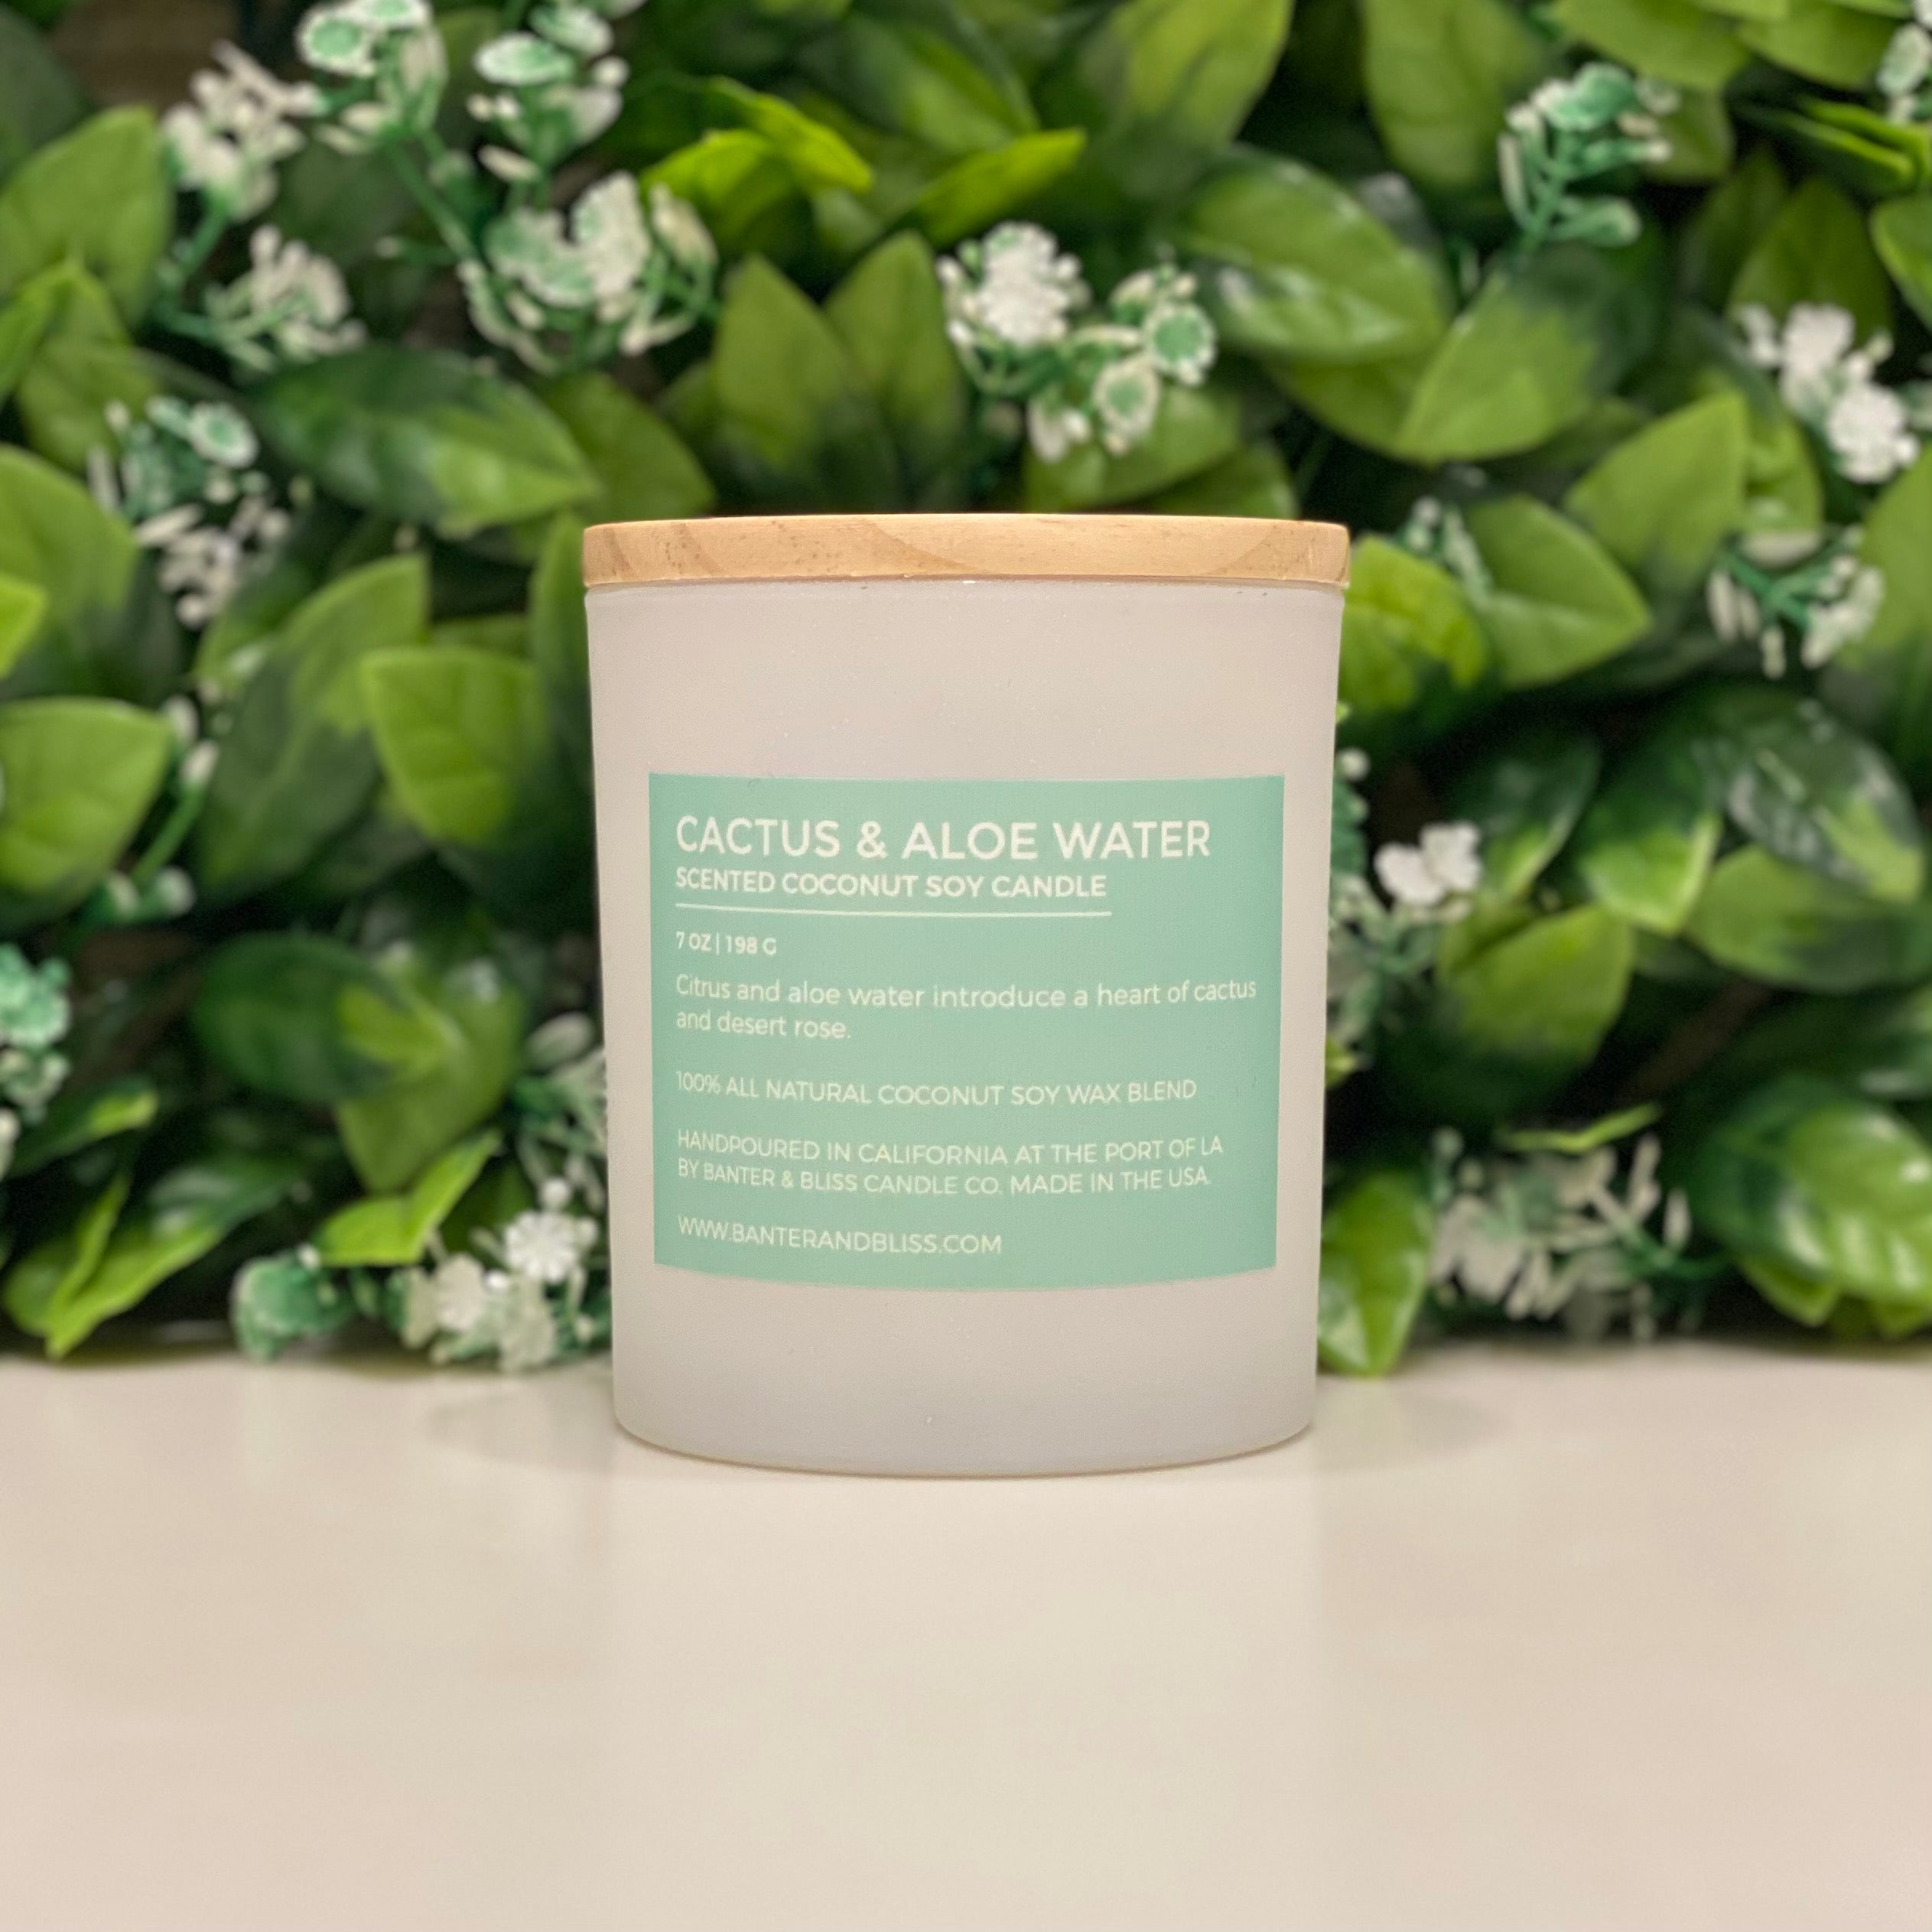 Cactus & Aloe Water. 7 oz. Scented Coconut Soy Candle.